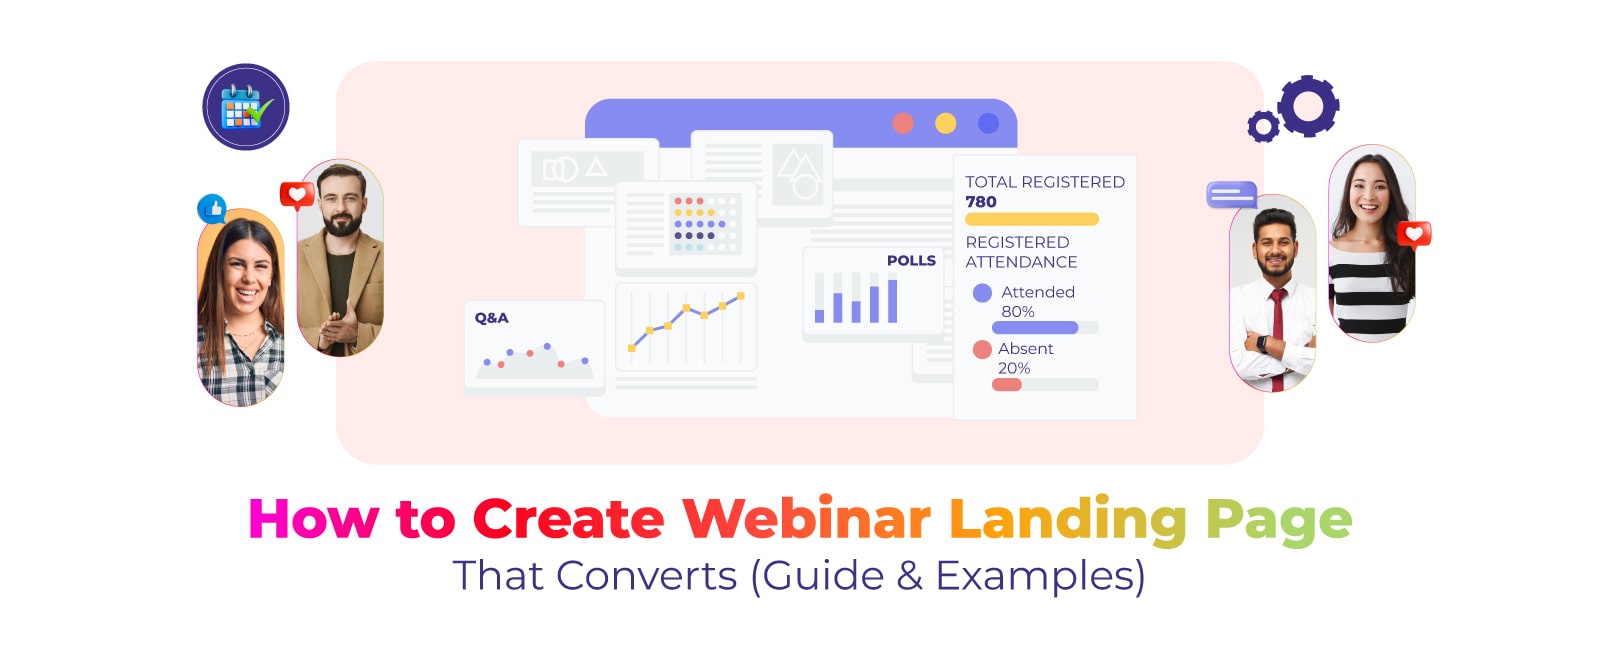 How to Create Webinar Landing Page That Converts (Guide & Examples)